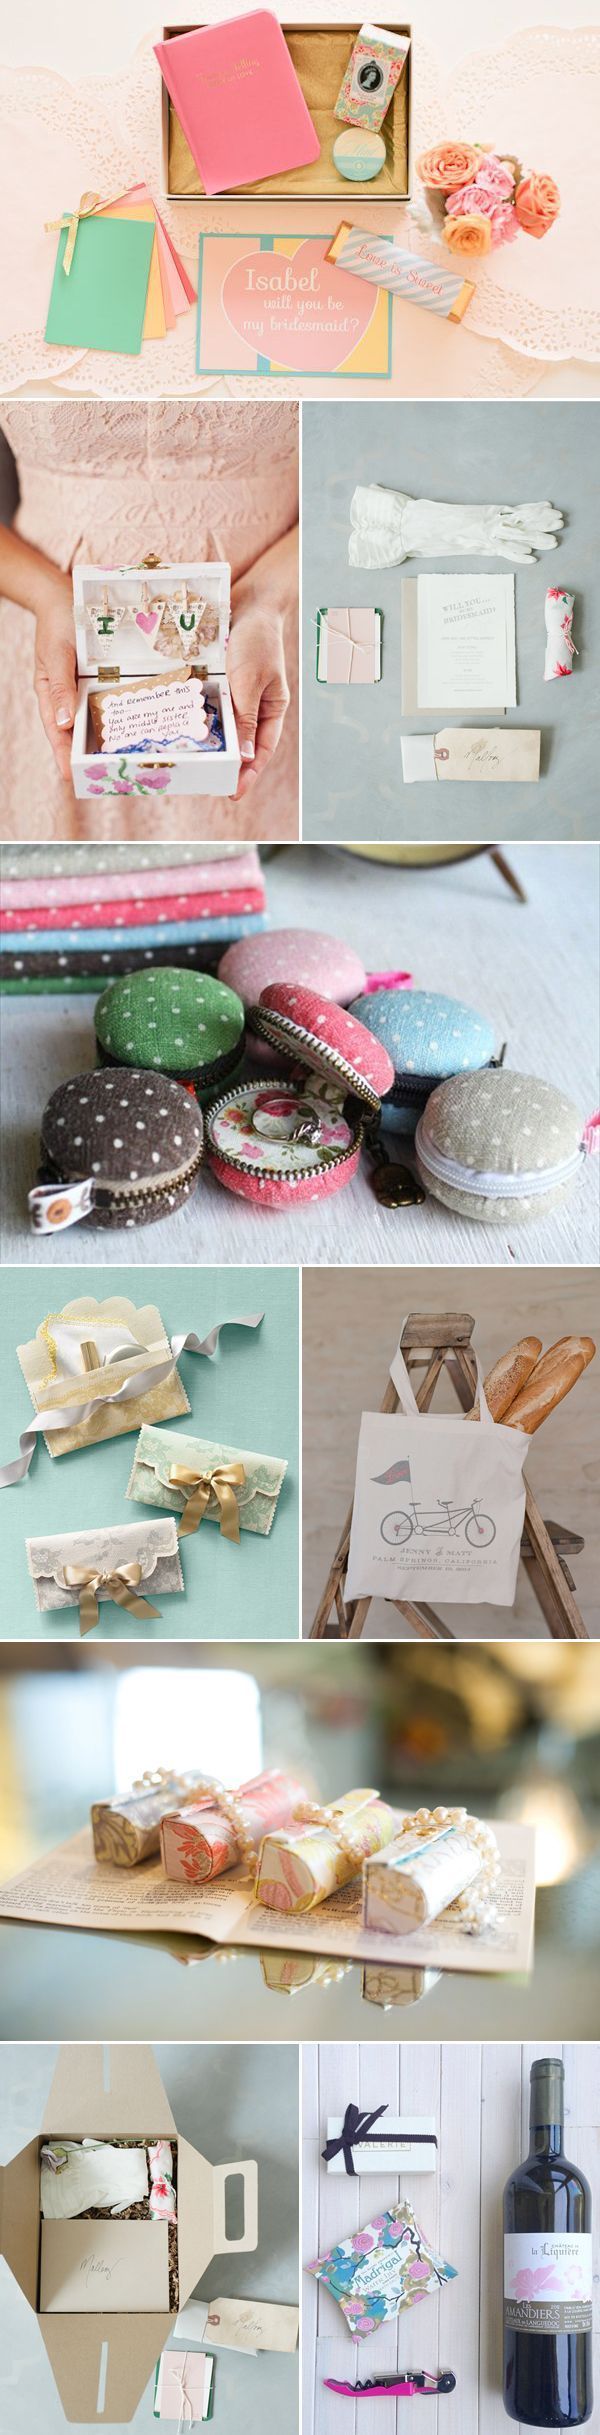 It's customary for the bride to prepare gifts for her bridesmaids as a thank you...